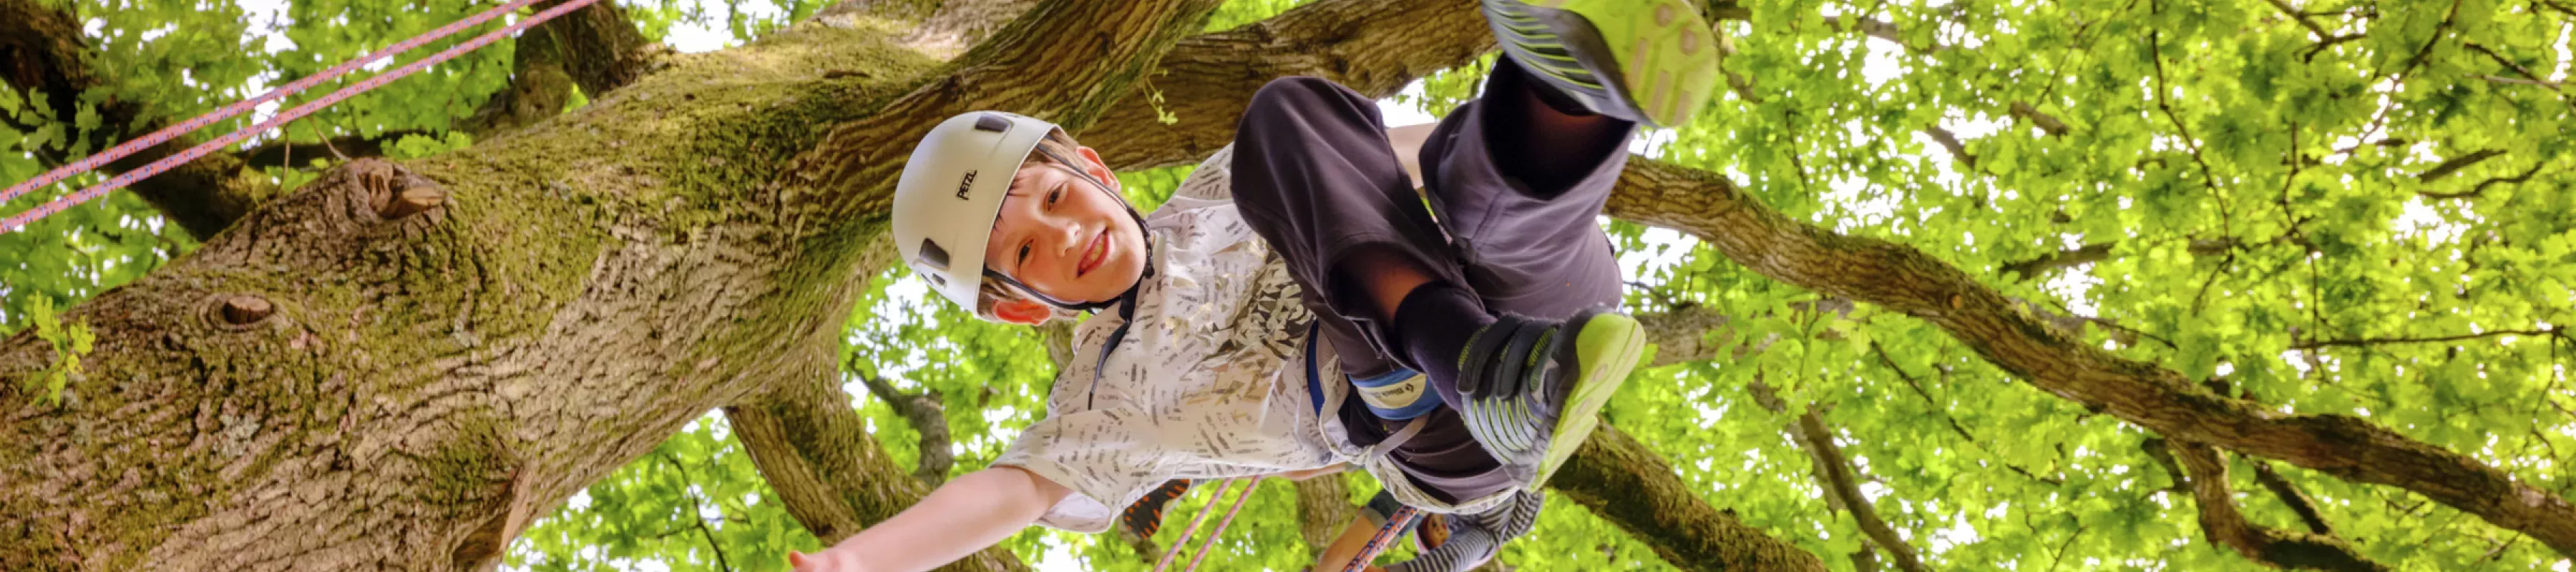 Boy dangling in a harness from a big tree